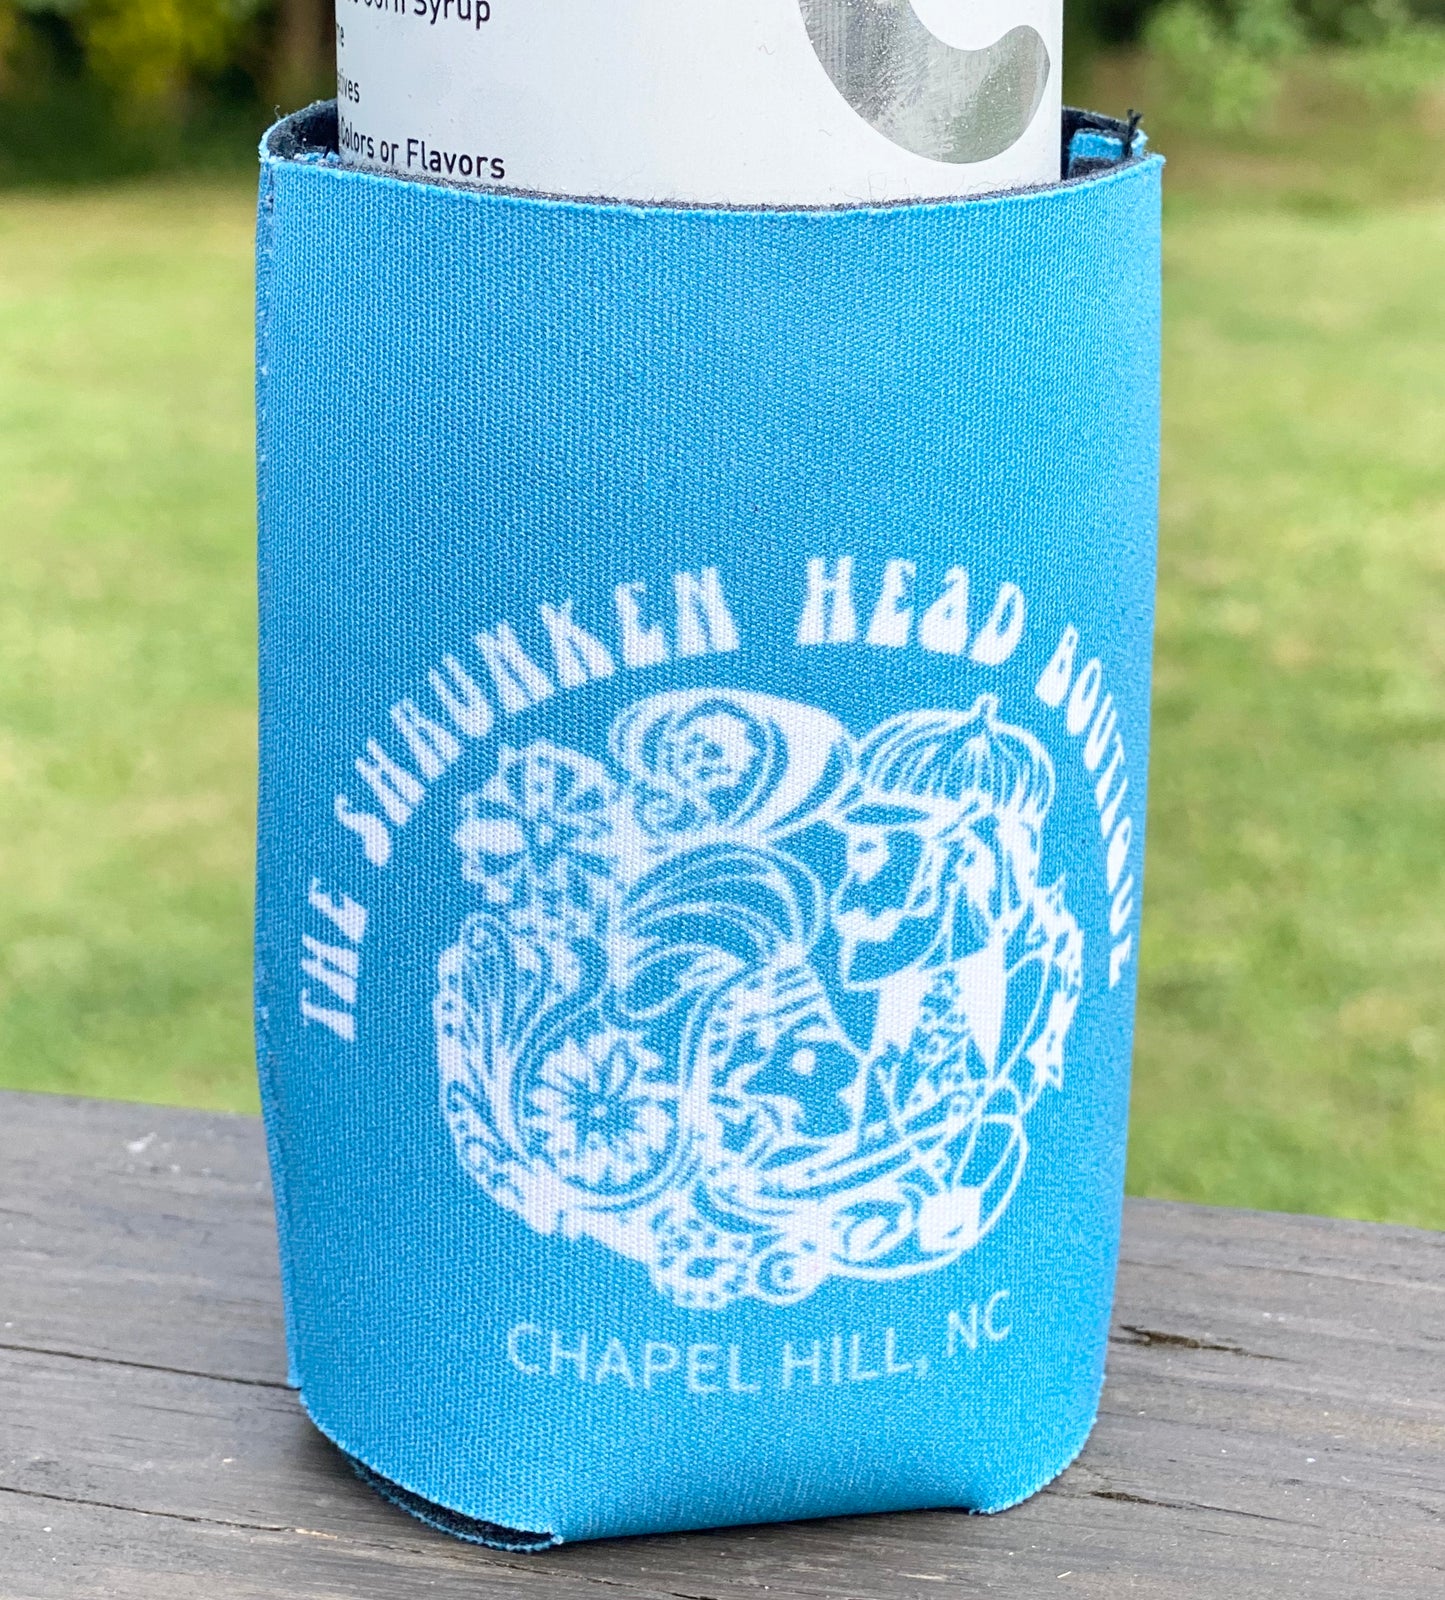 Chapel Hill North Carolina Koozie for 12 oz Standard Cans by SHB